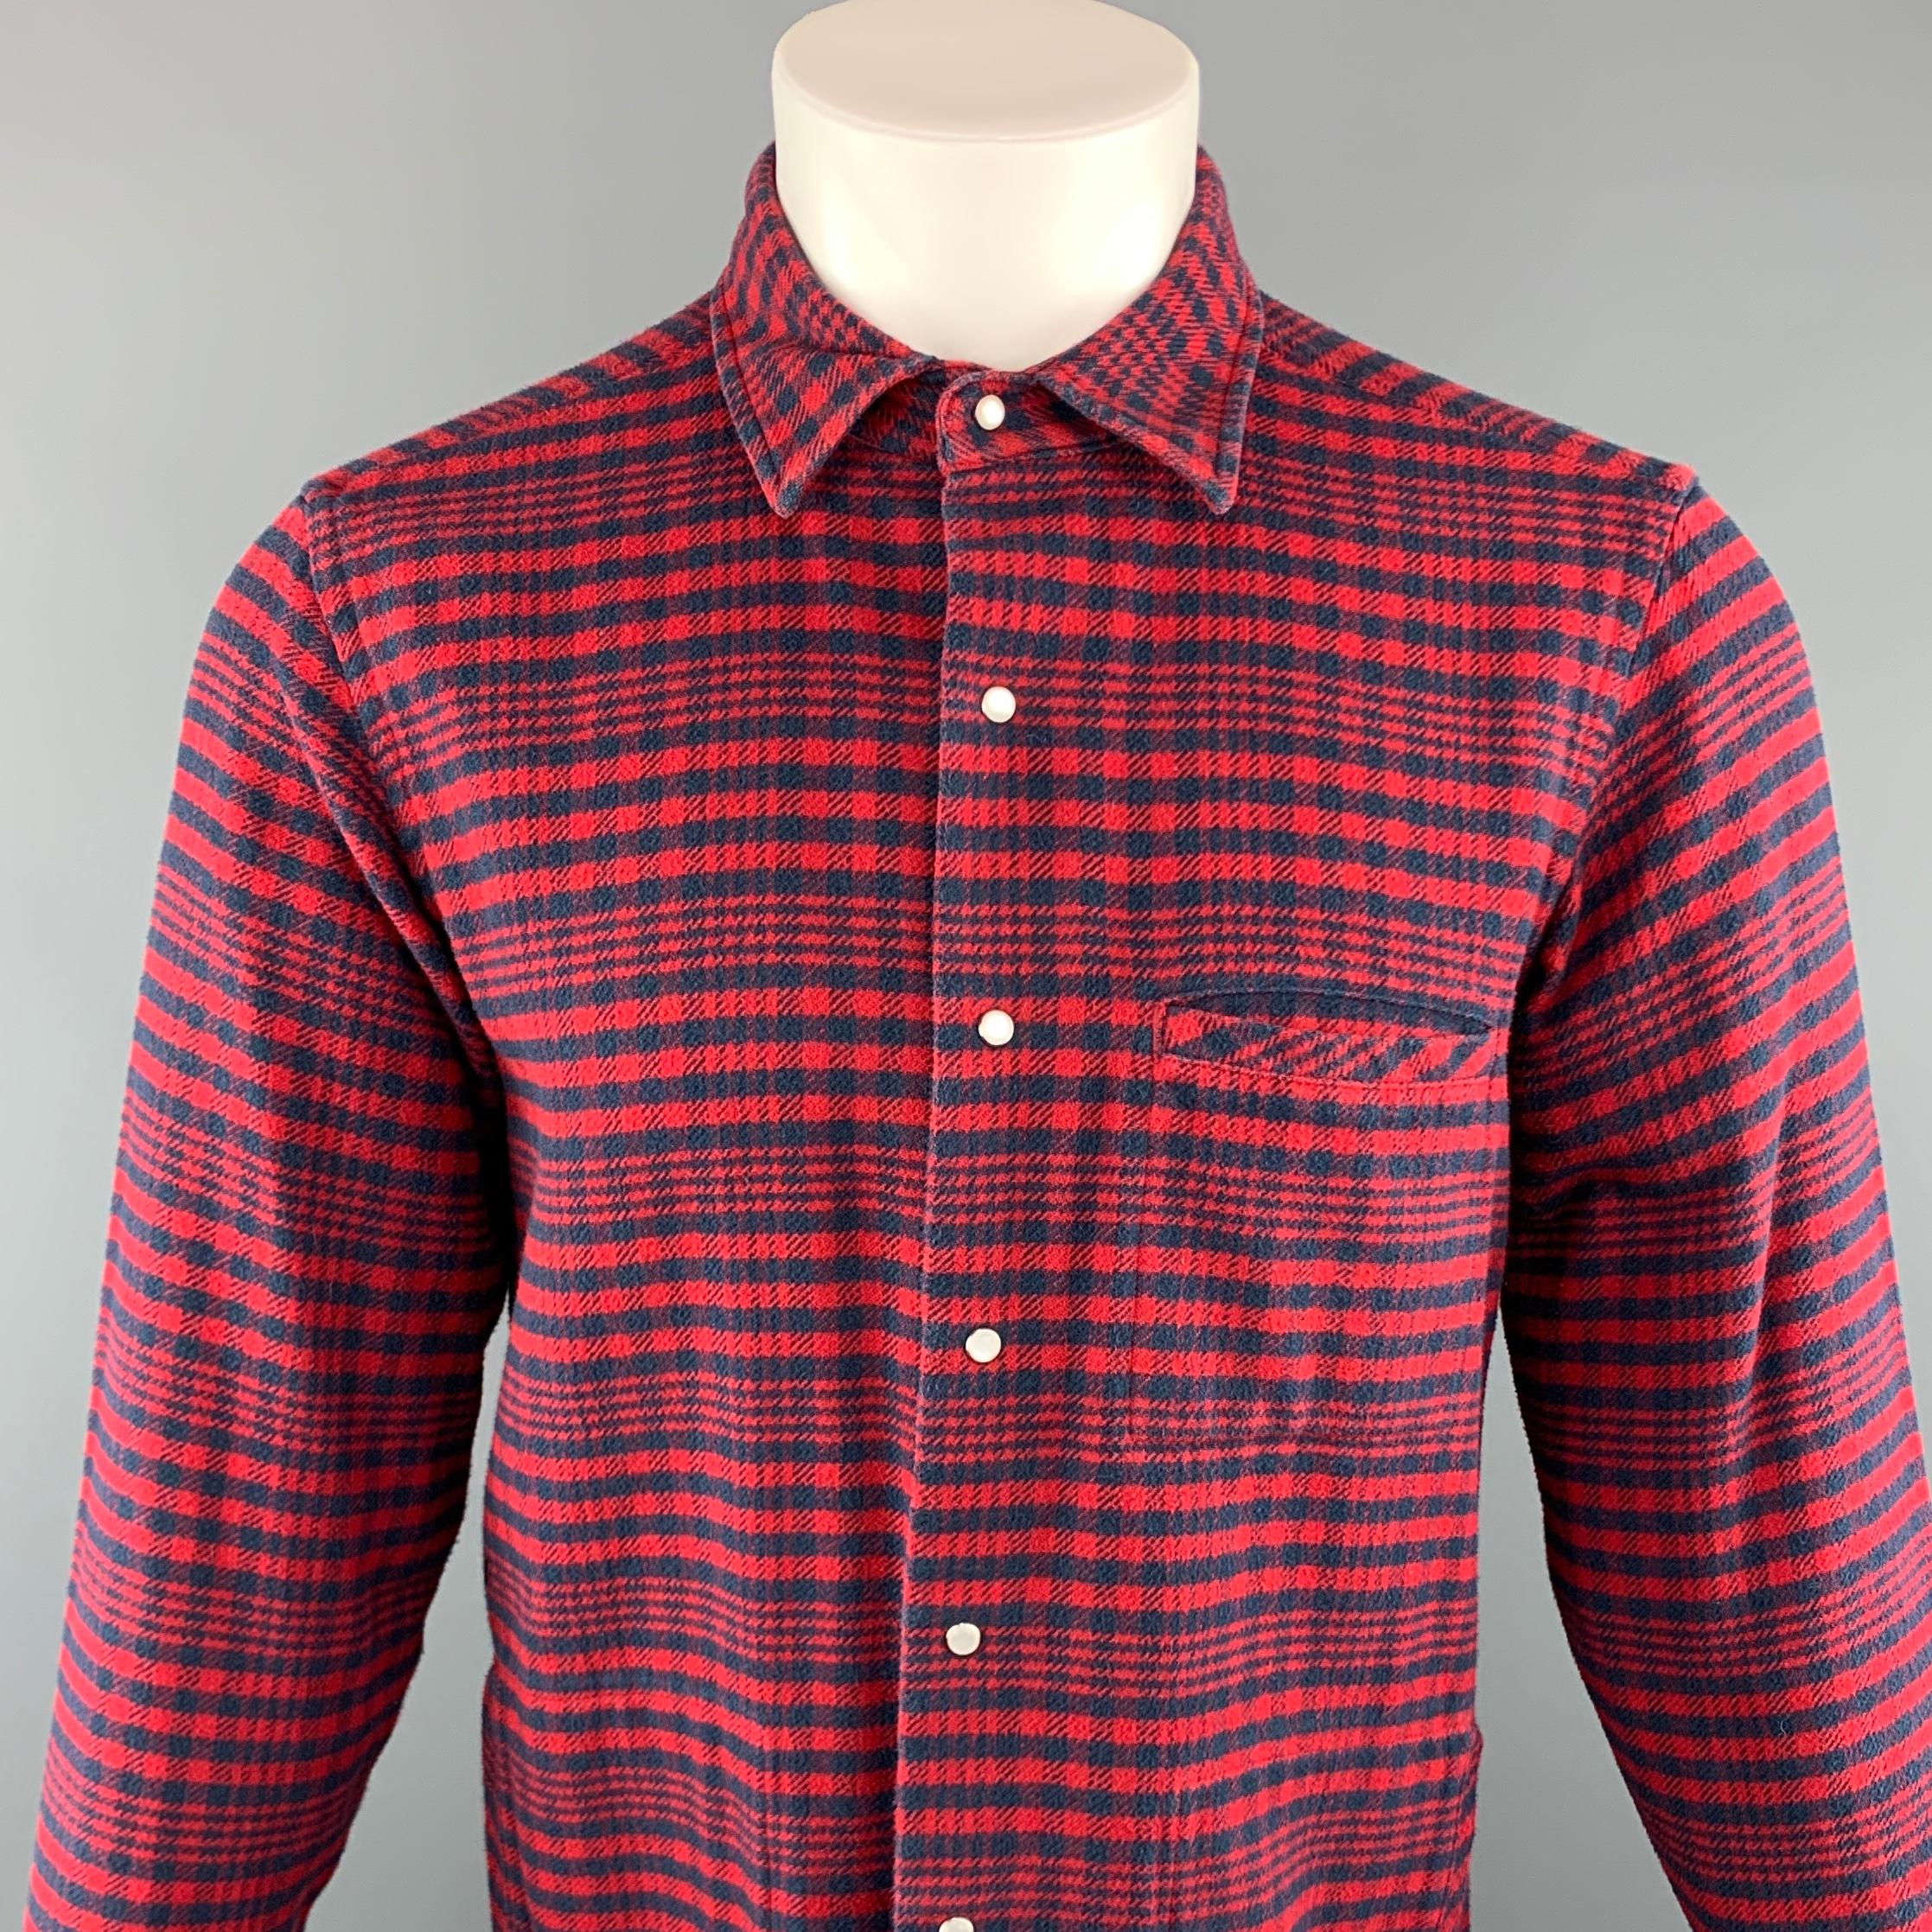 THOM BROWNE long sleeve shirt comes in a red and navy plaid cotton featuring a button up style, snap closure, front patch pocket, and a spread collar. Made in USA.
 
Excellent Pre-Owned Condition.
Marked: 2
 
Measurements:
 
Shoulder: 17 in.
Chest: